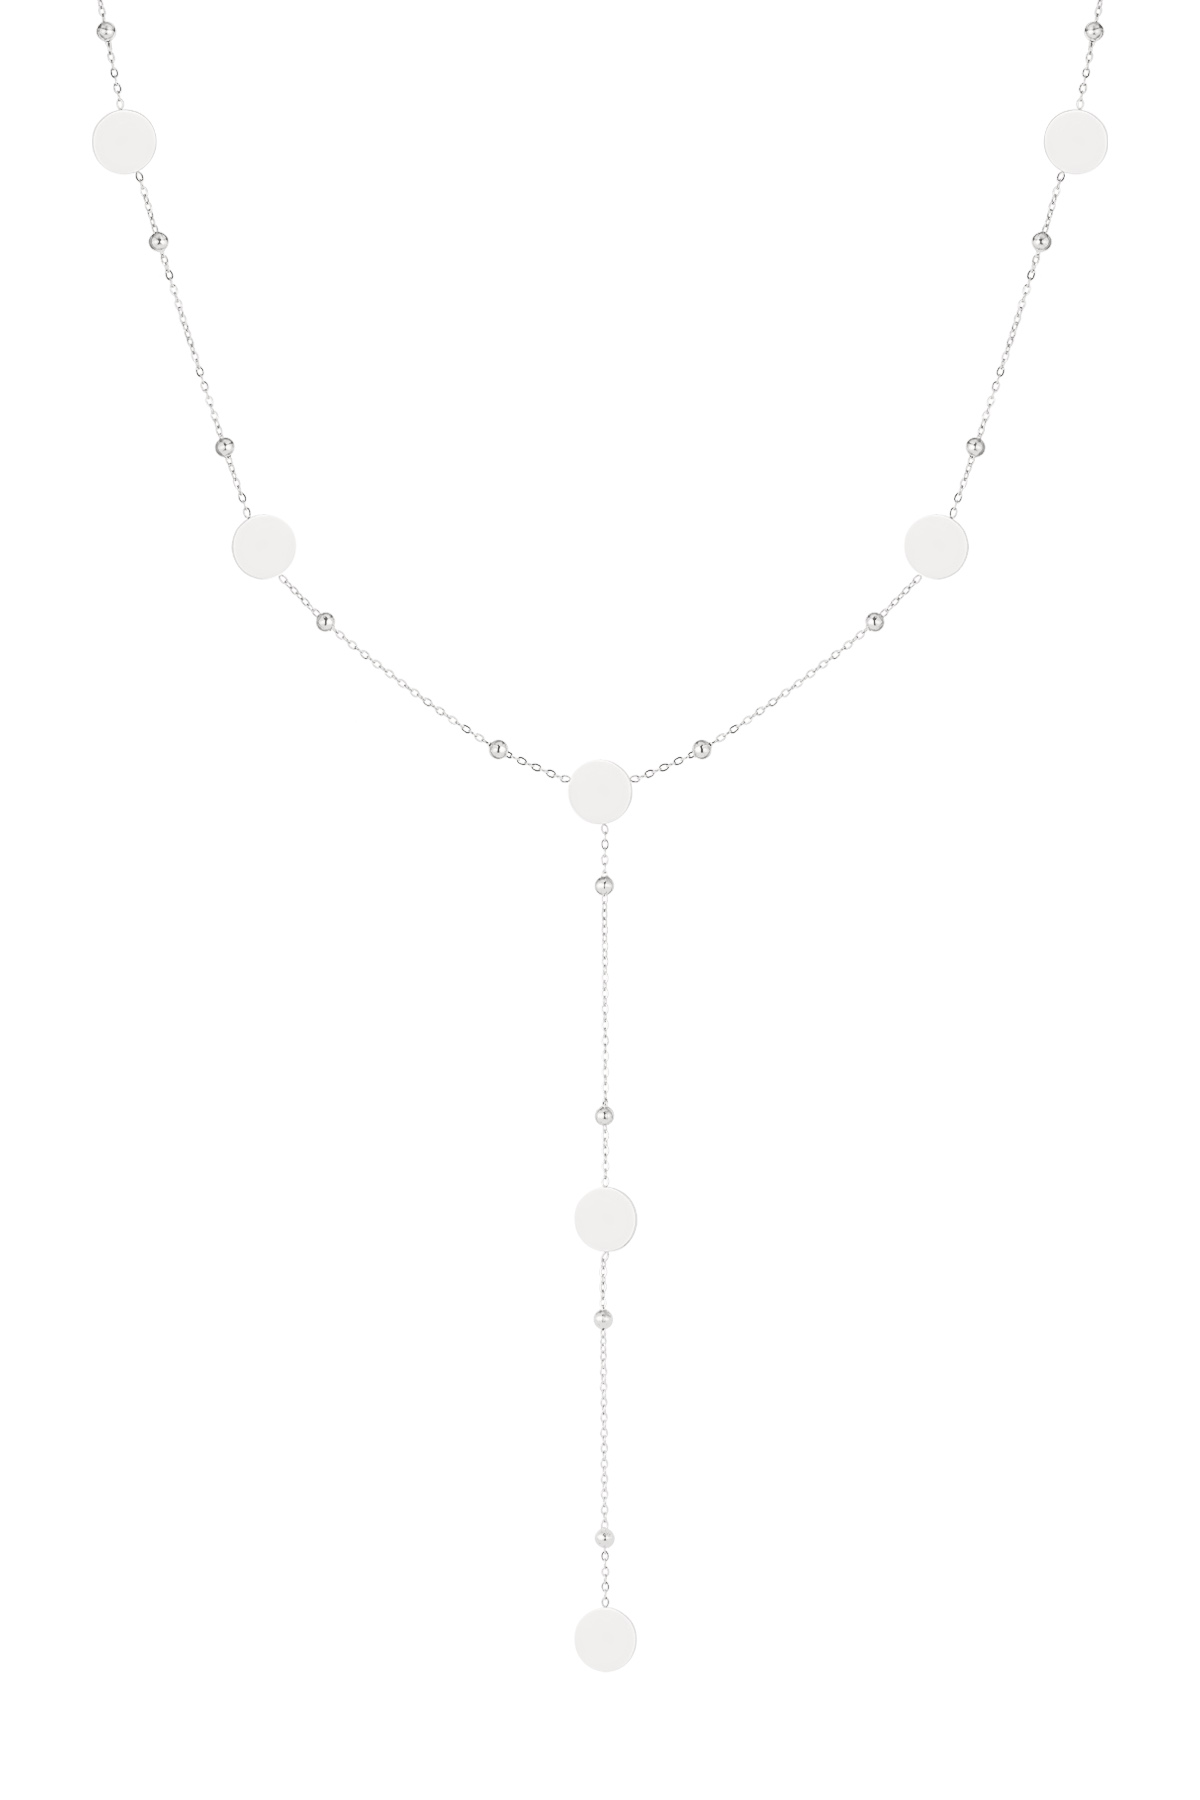 Long necklace circles all over - silver